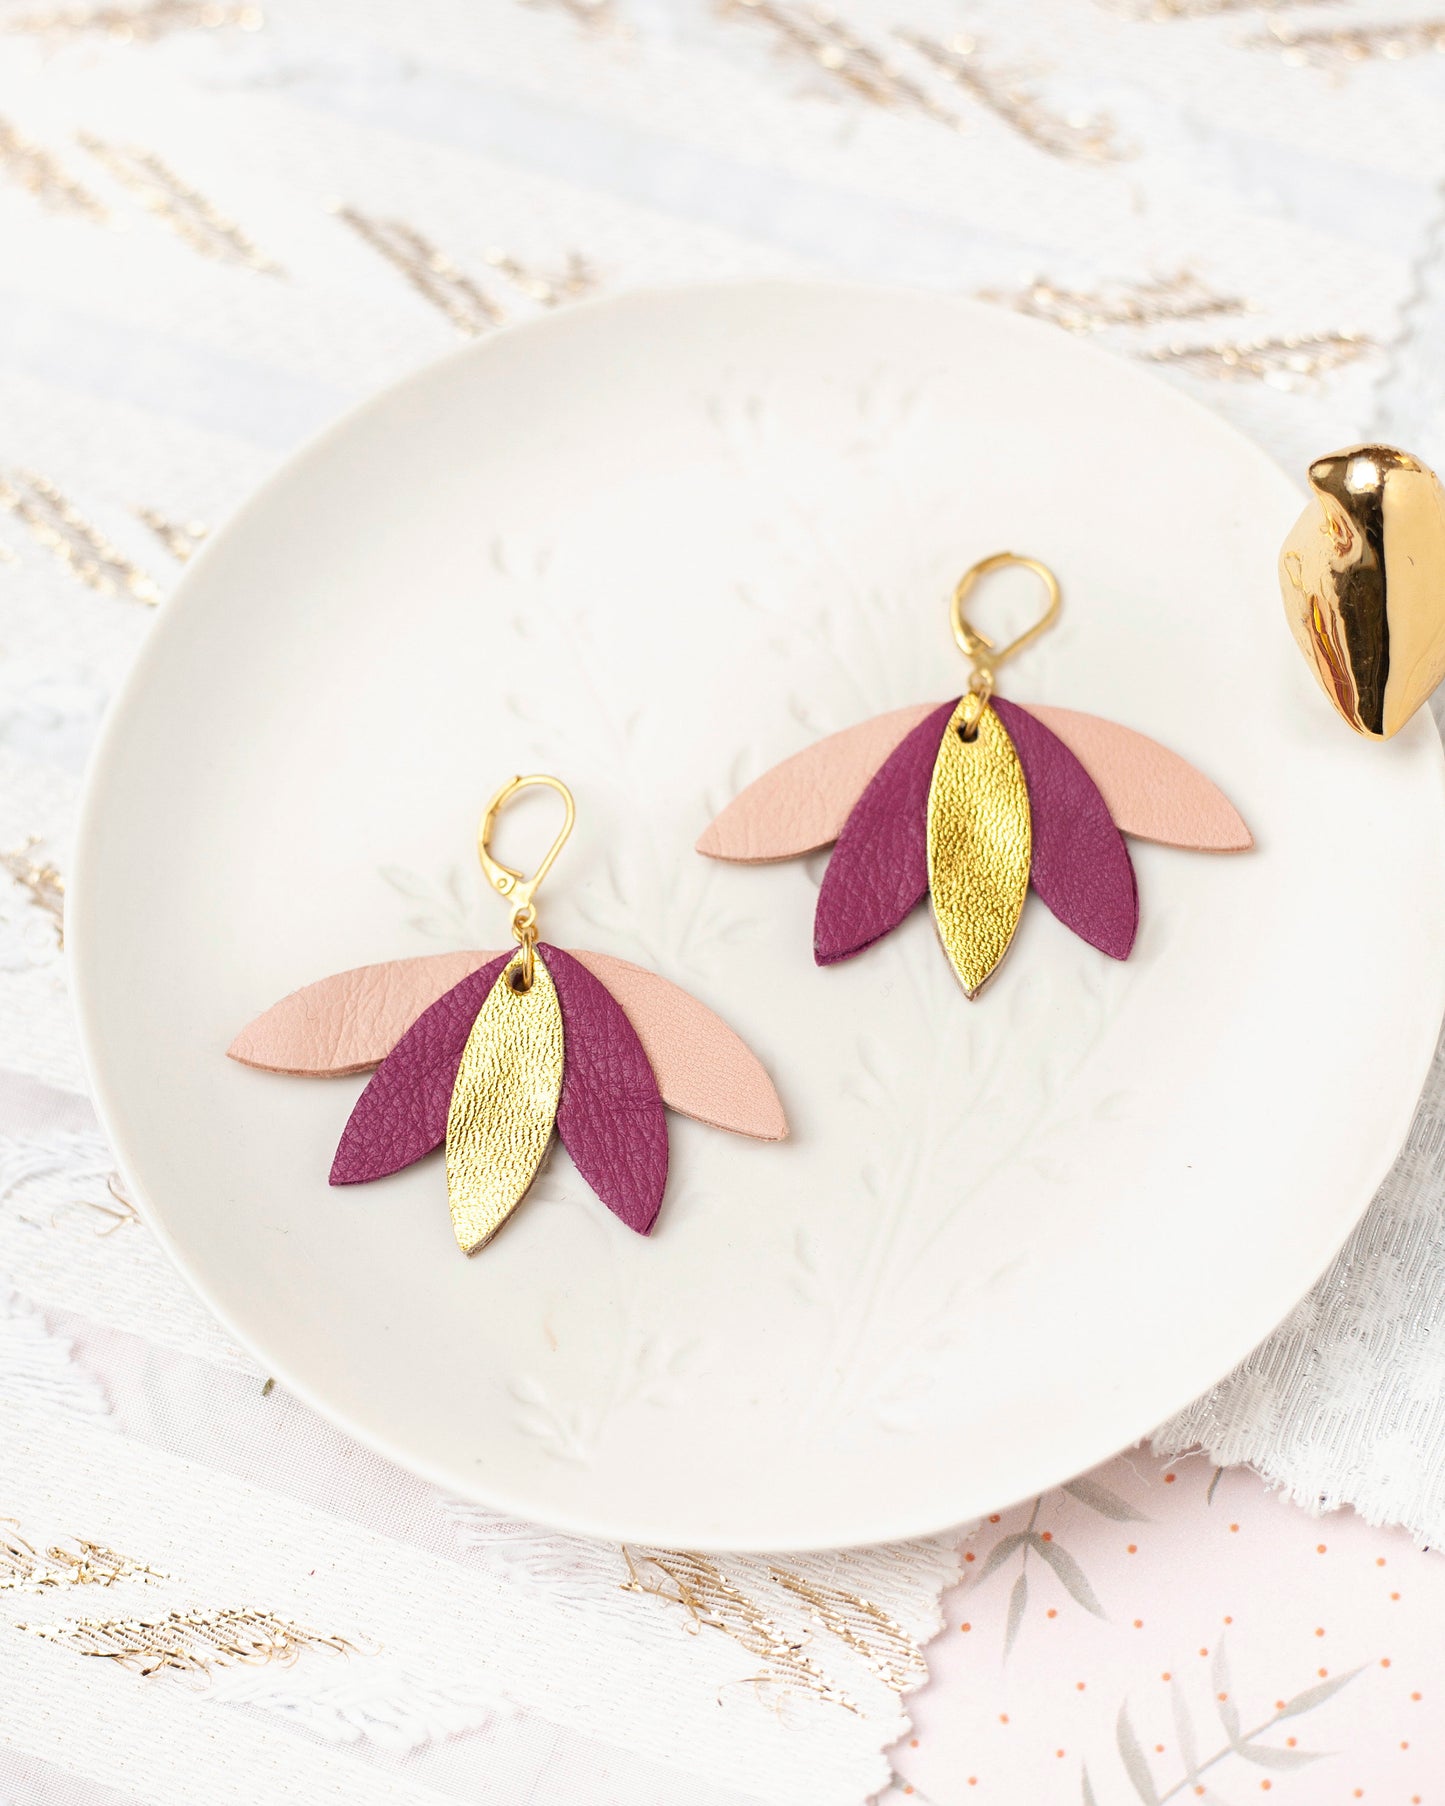 Palm tree earrings in golden pink plum leather